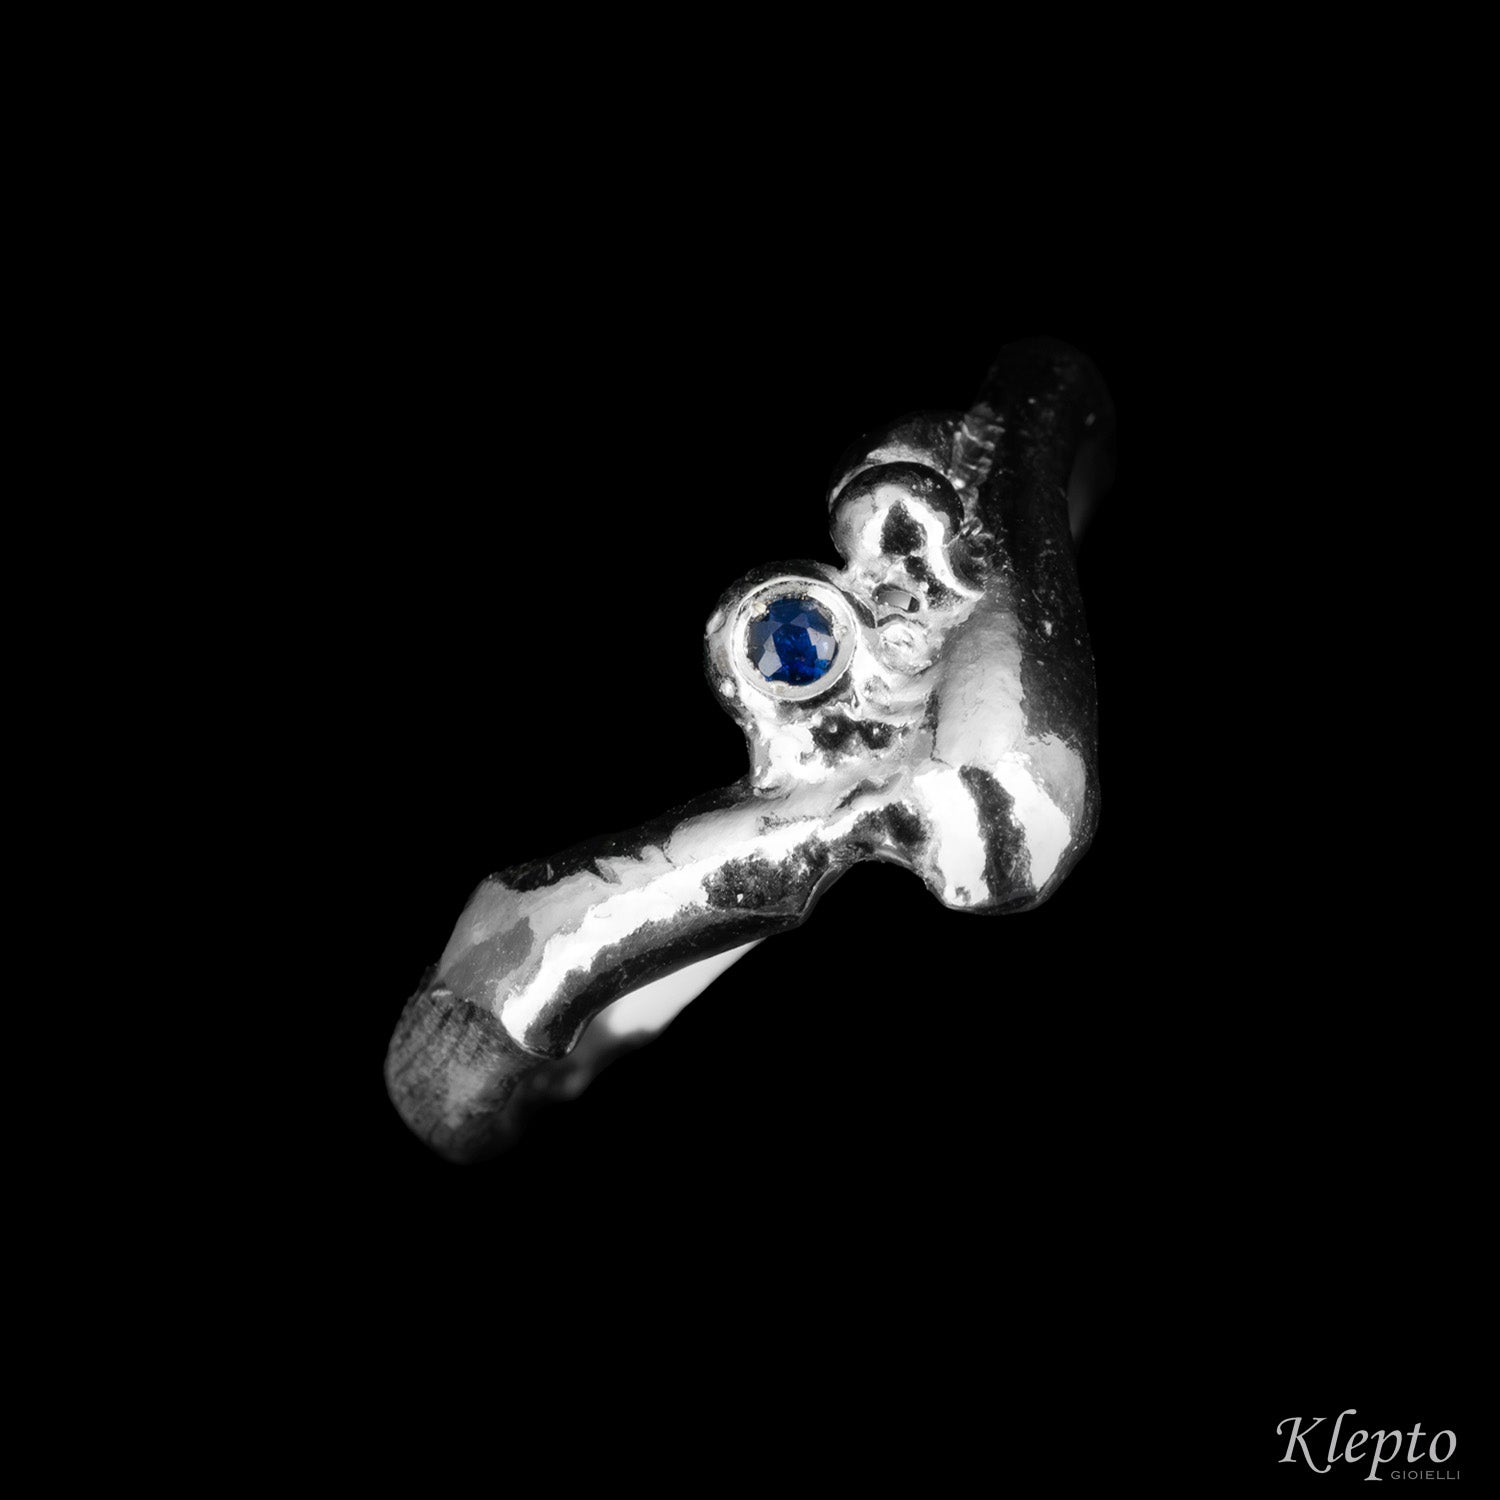 Silnova Silver Ring with Blue Sapphire